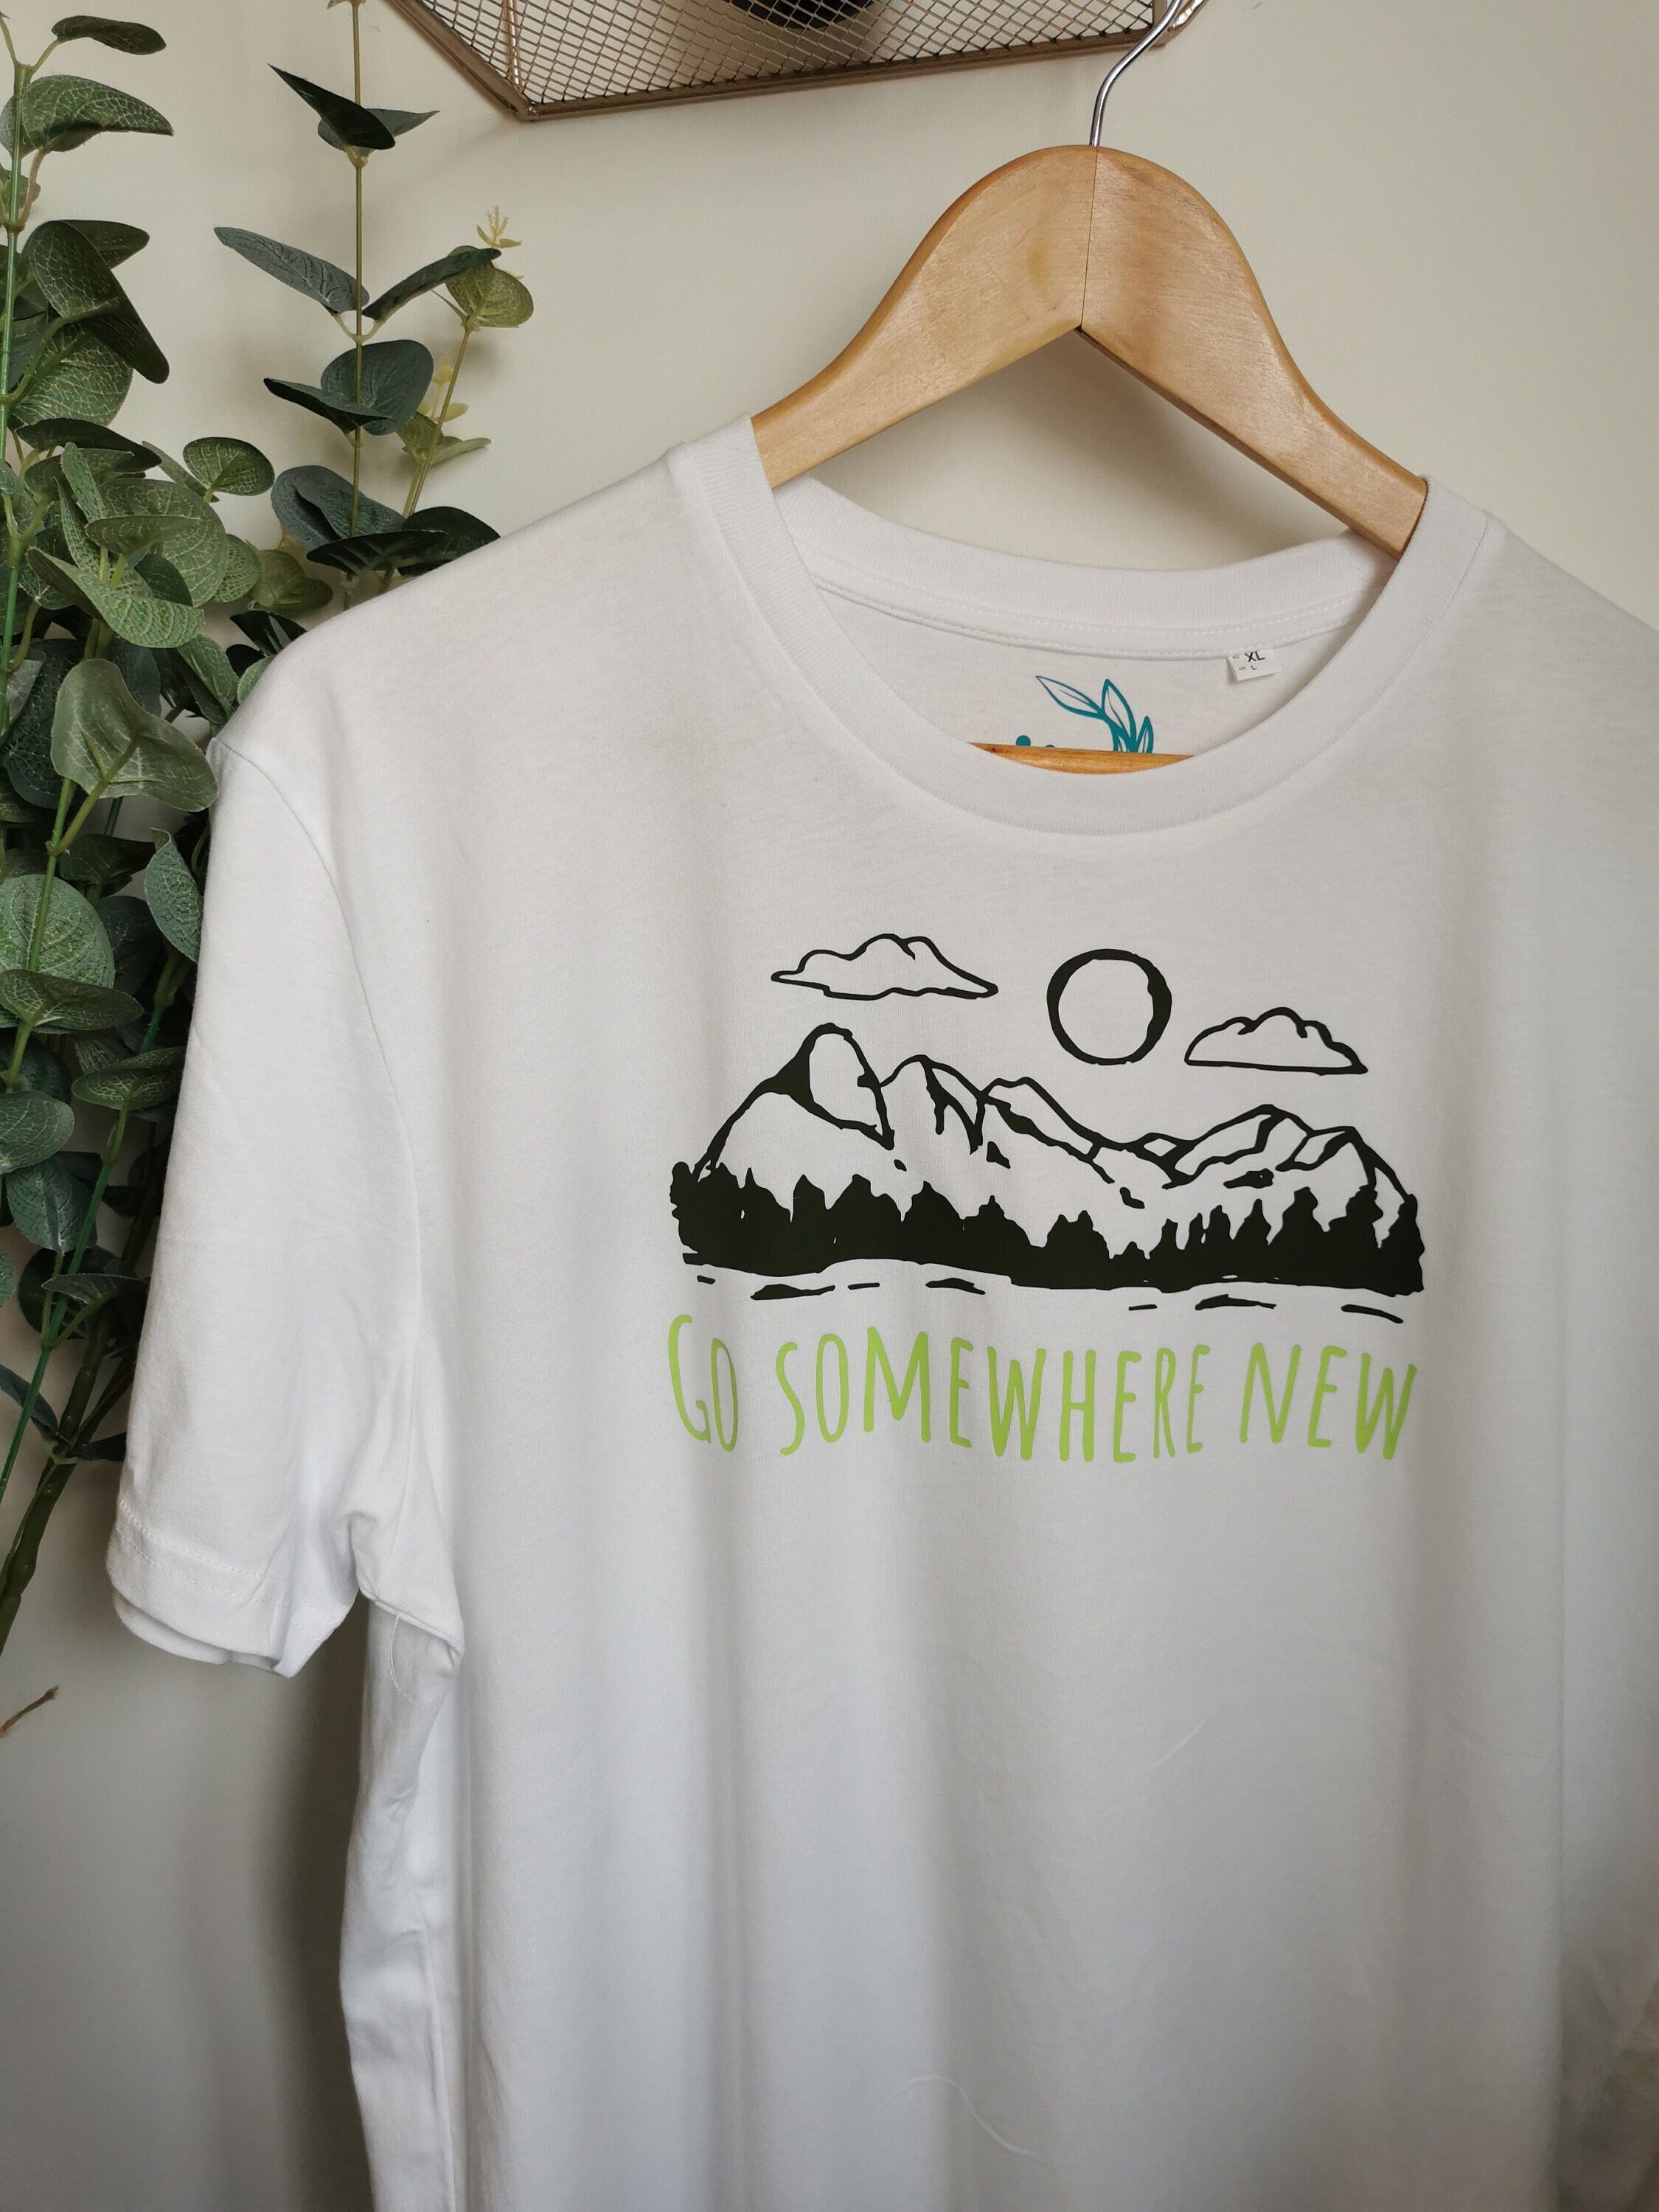 Go Somewhere New White Organic Cotton T-shirt, Adventure Travel, Outdoor  Clothing, Hikingwear, Van Life, Unique Hiking Gifts, Valentine Gift - Etsy